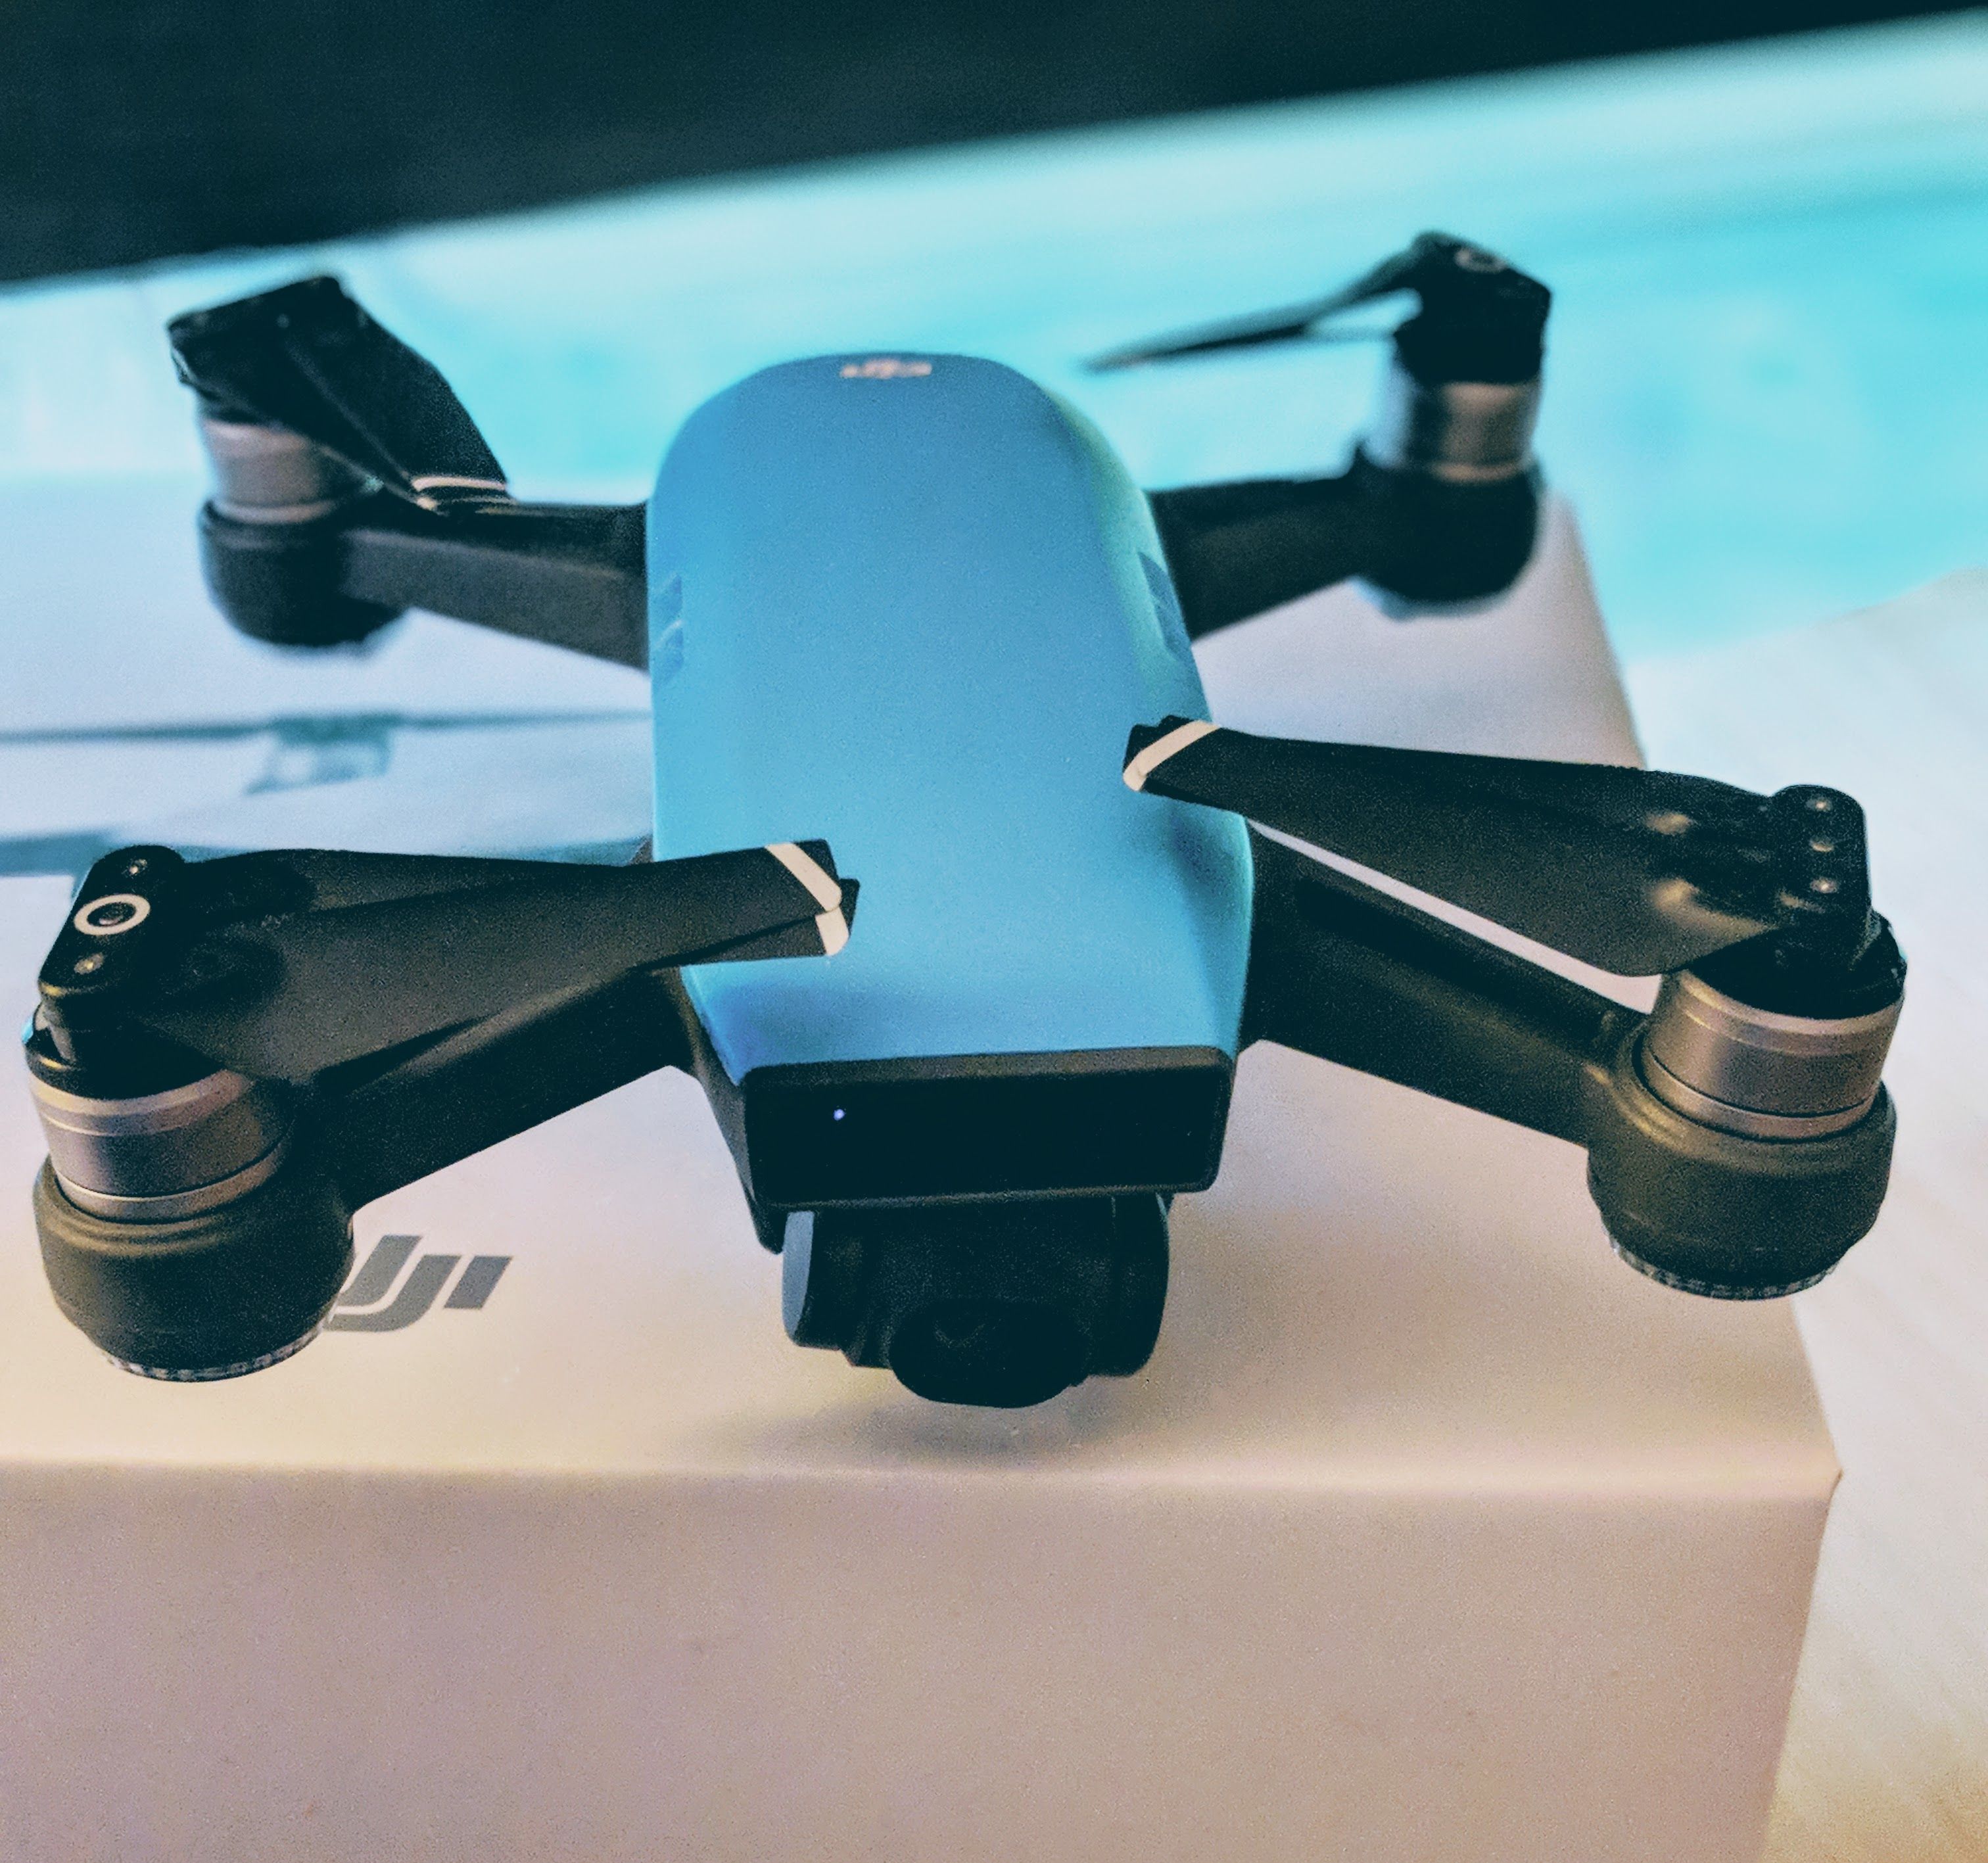 BRAND NEW /NEVER FLOWN ~ DJI Spark Drone +Fly More Official Bundle 4k